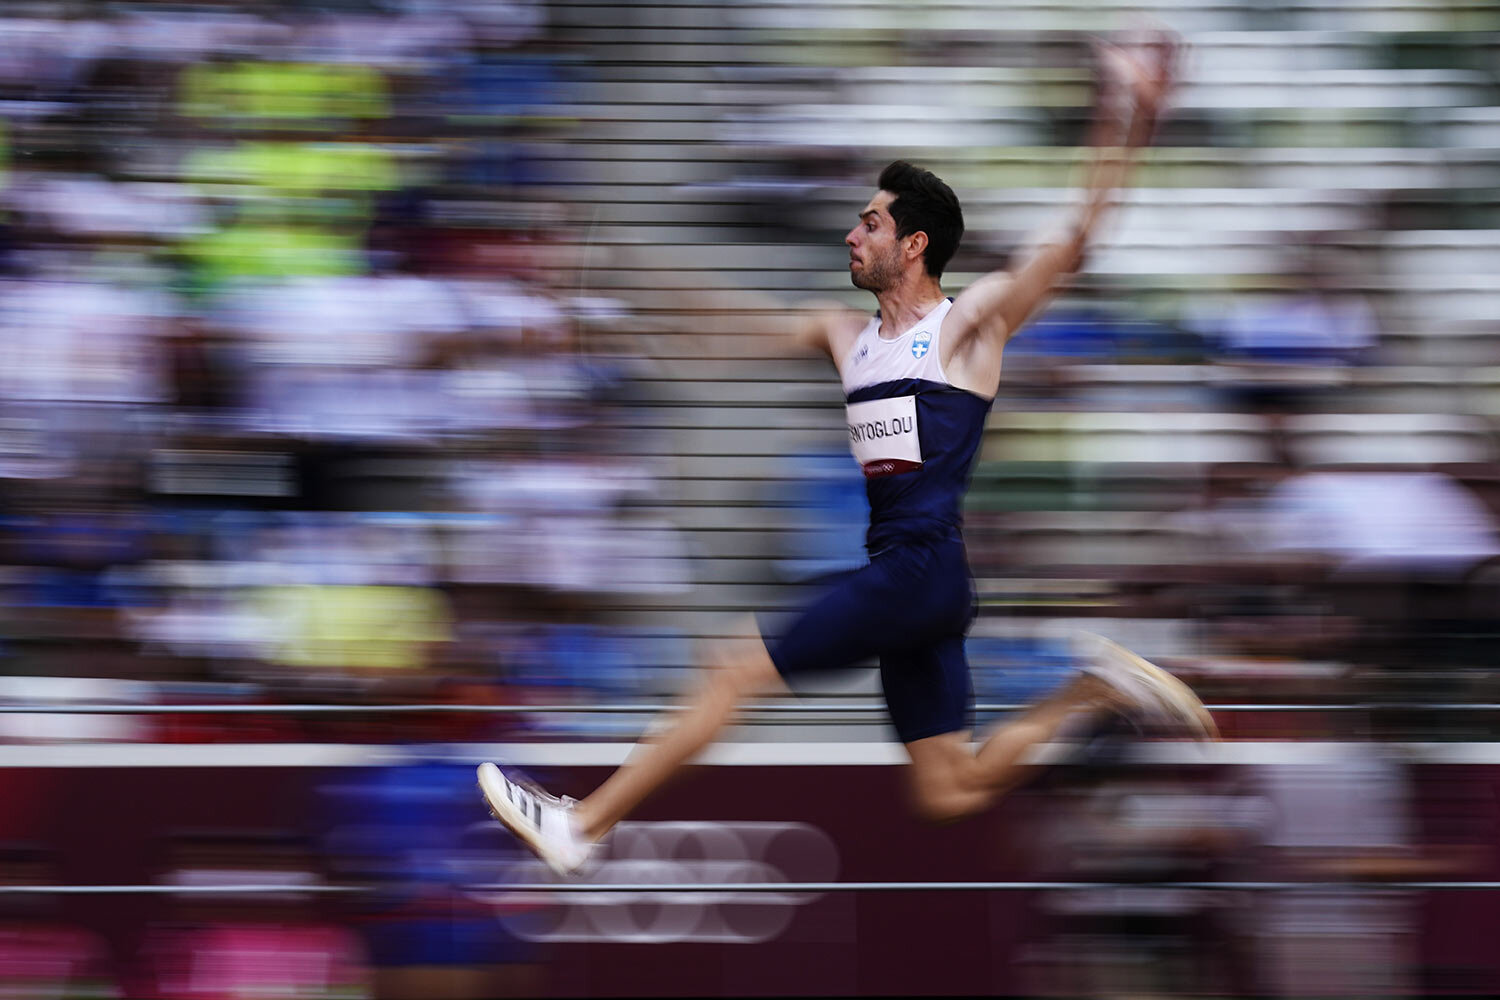  Miltiadis Tentoglou, of Greece, competes in men's long jump final at the 2020 Summer Olympics, Monday, Aug. 2, 2021, in Tokyo.(AP Photo/David J. Phillip) 